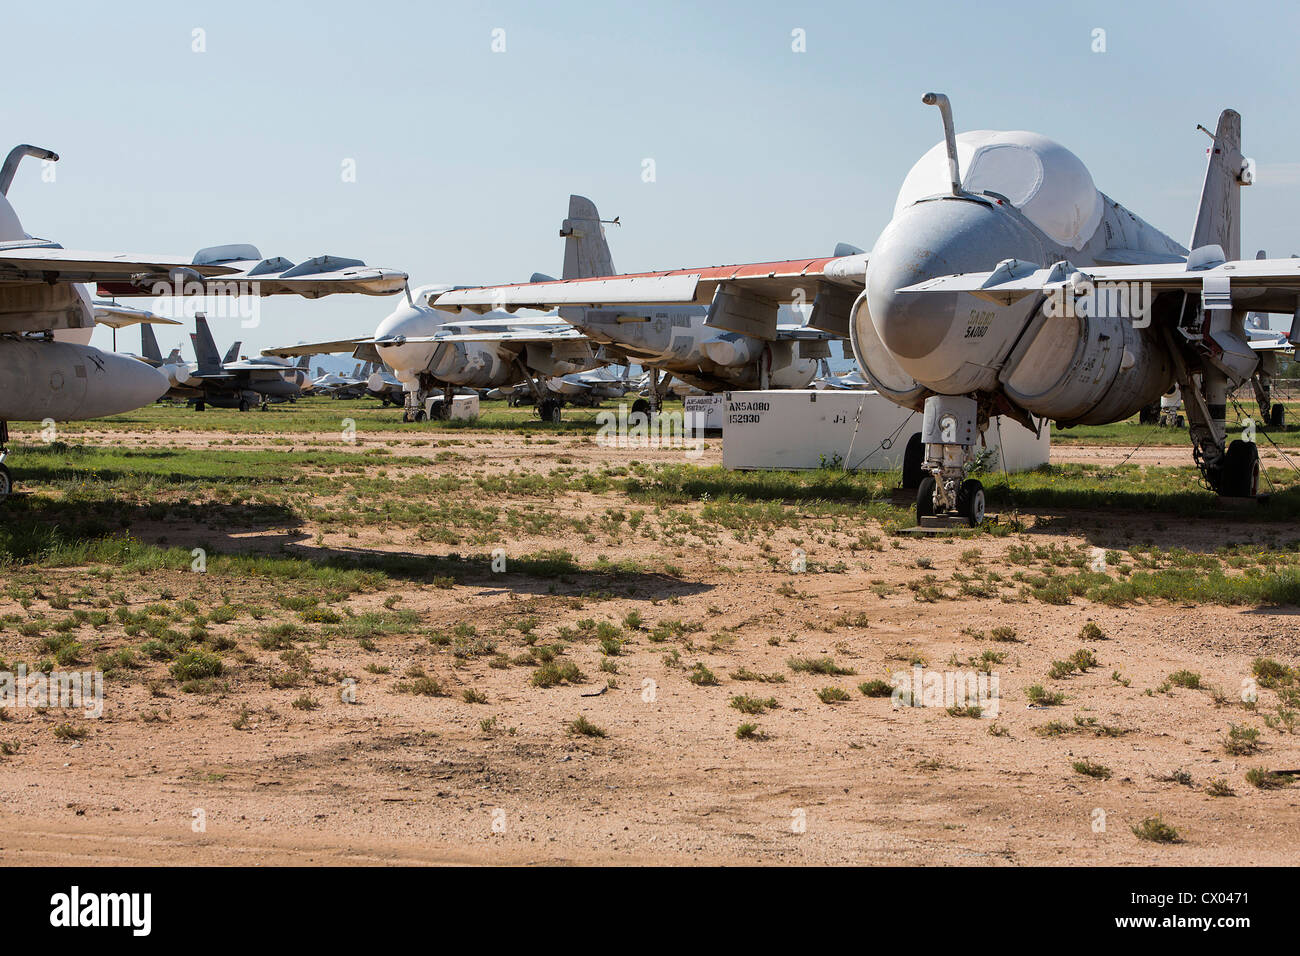 A-6 Intruder aircraft in storage at the 309th Aerospace Maintenance and Regeneration Group at Davis-Monthan Air Force Base. Stock Photo